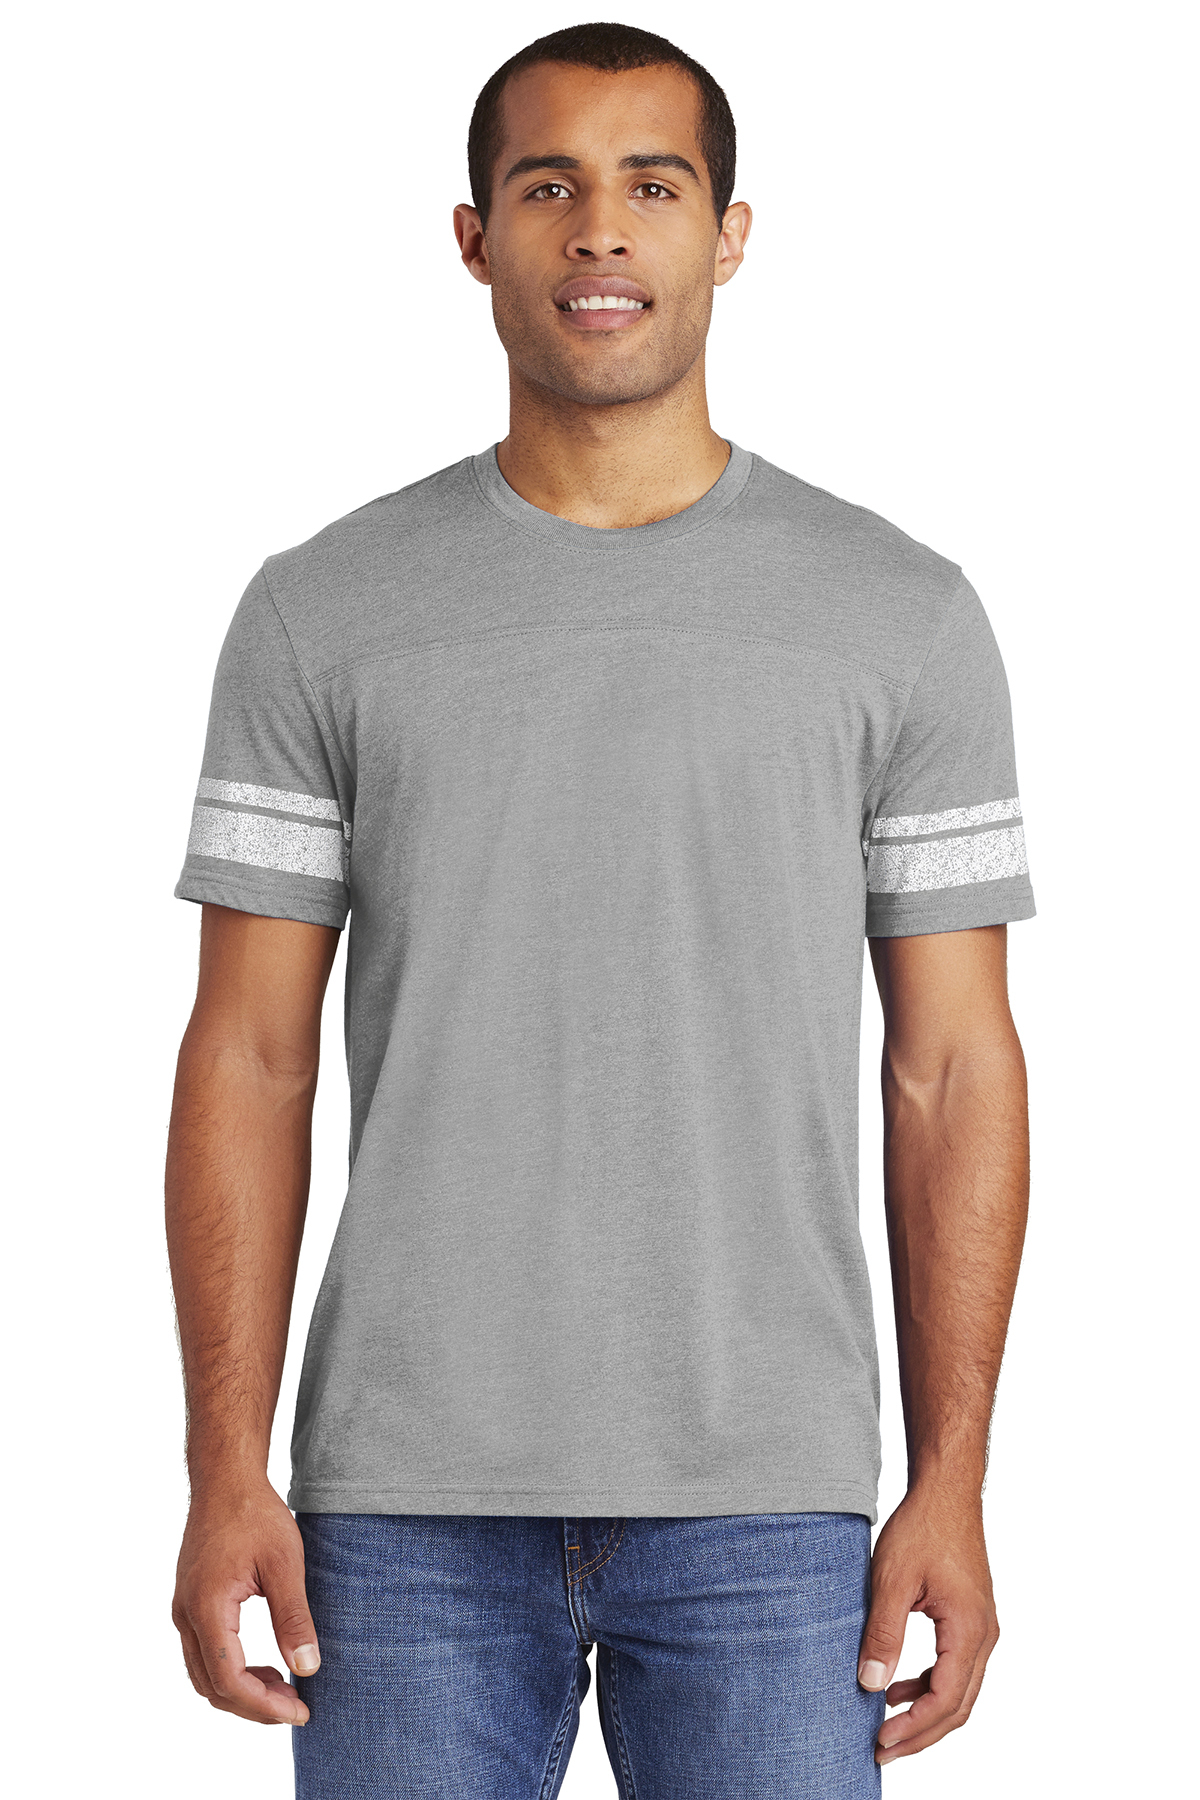 District DT376 - Mens Game Tee